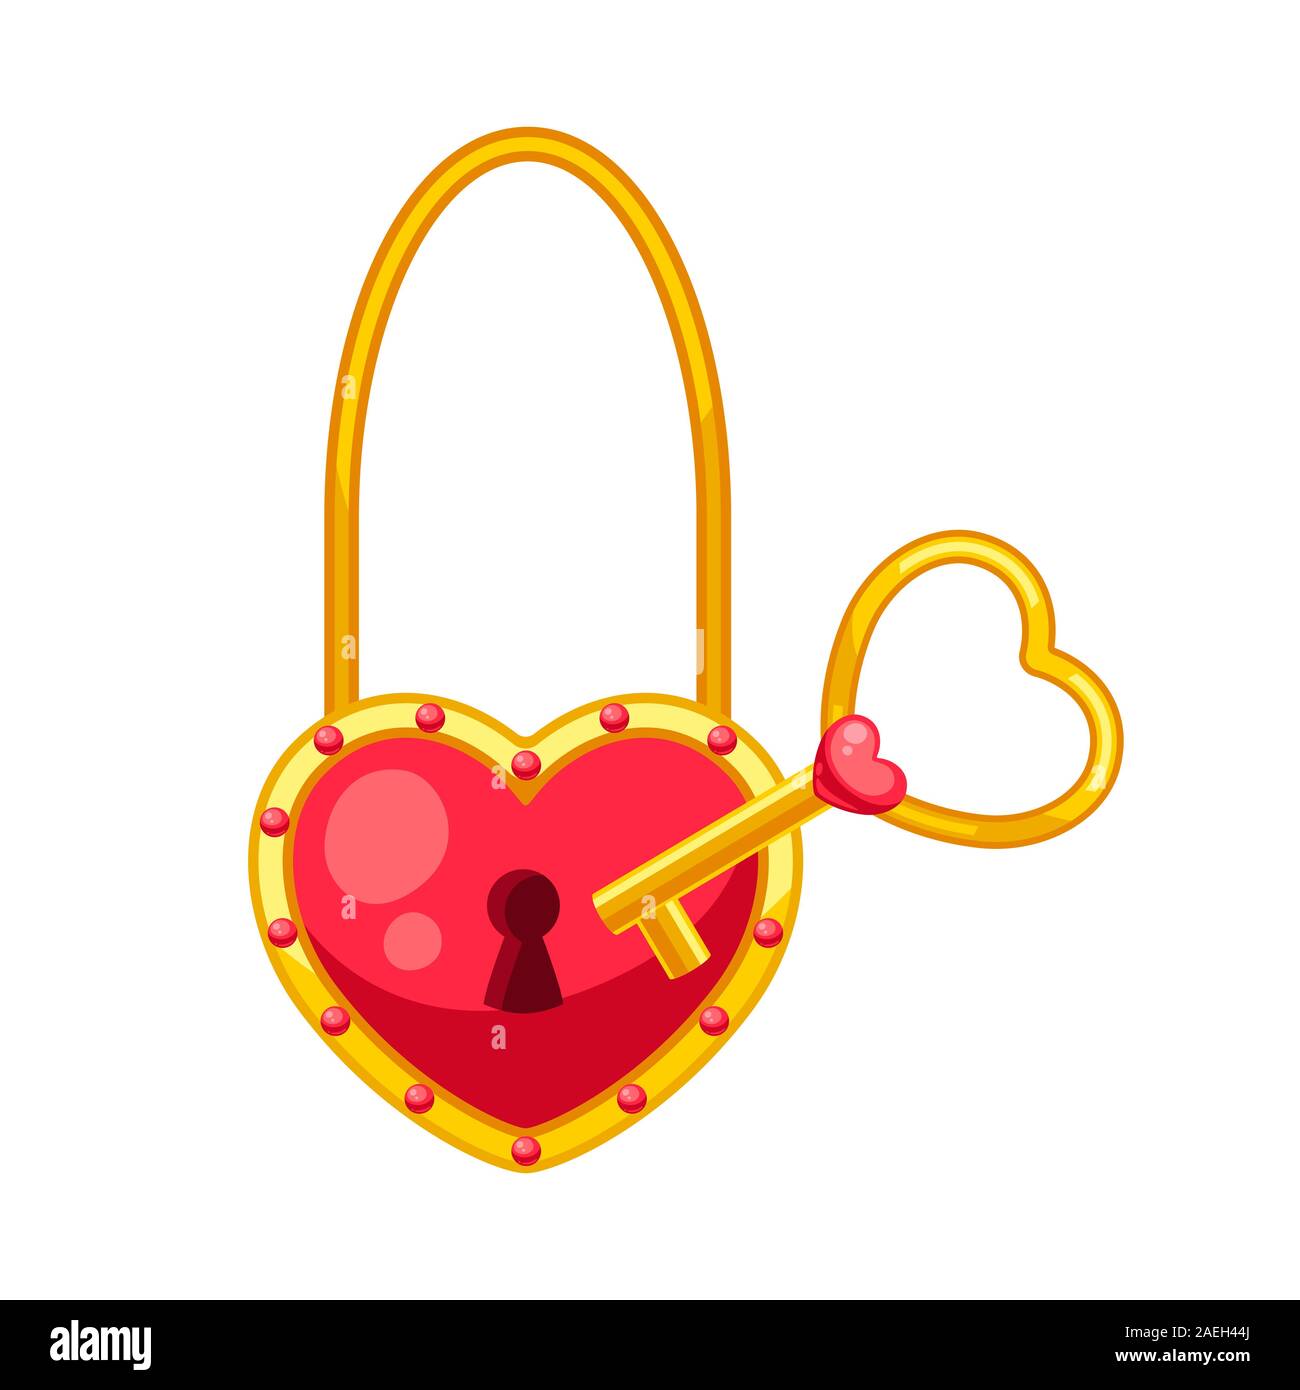 Valentines Day heart shaped lock with key. Stock Vector